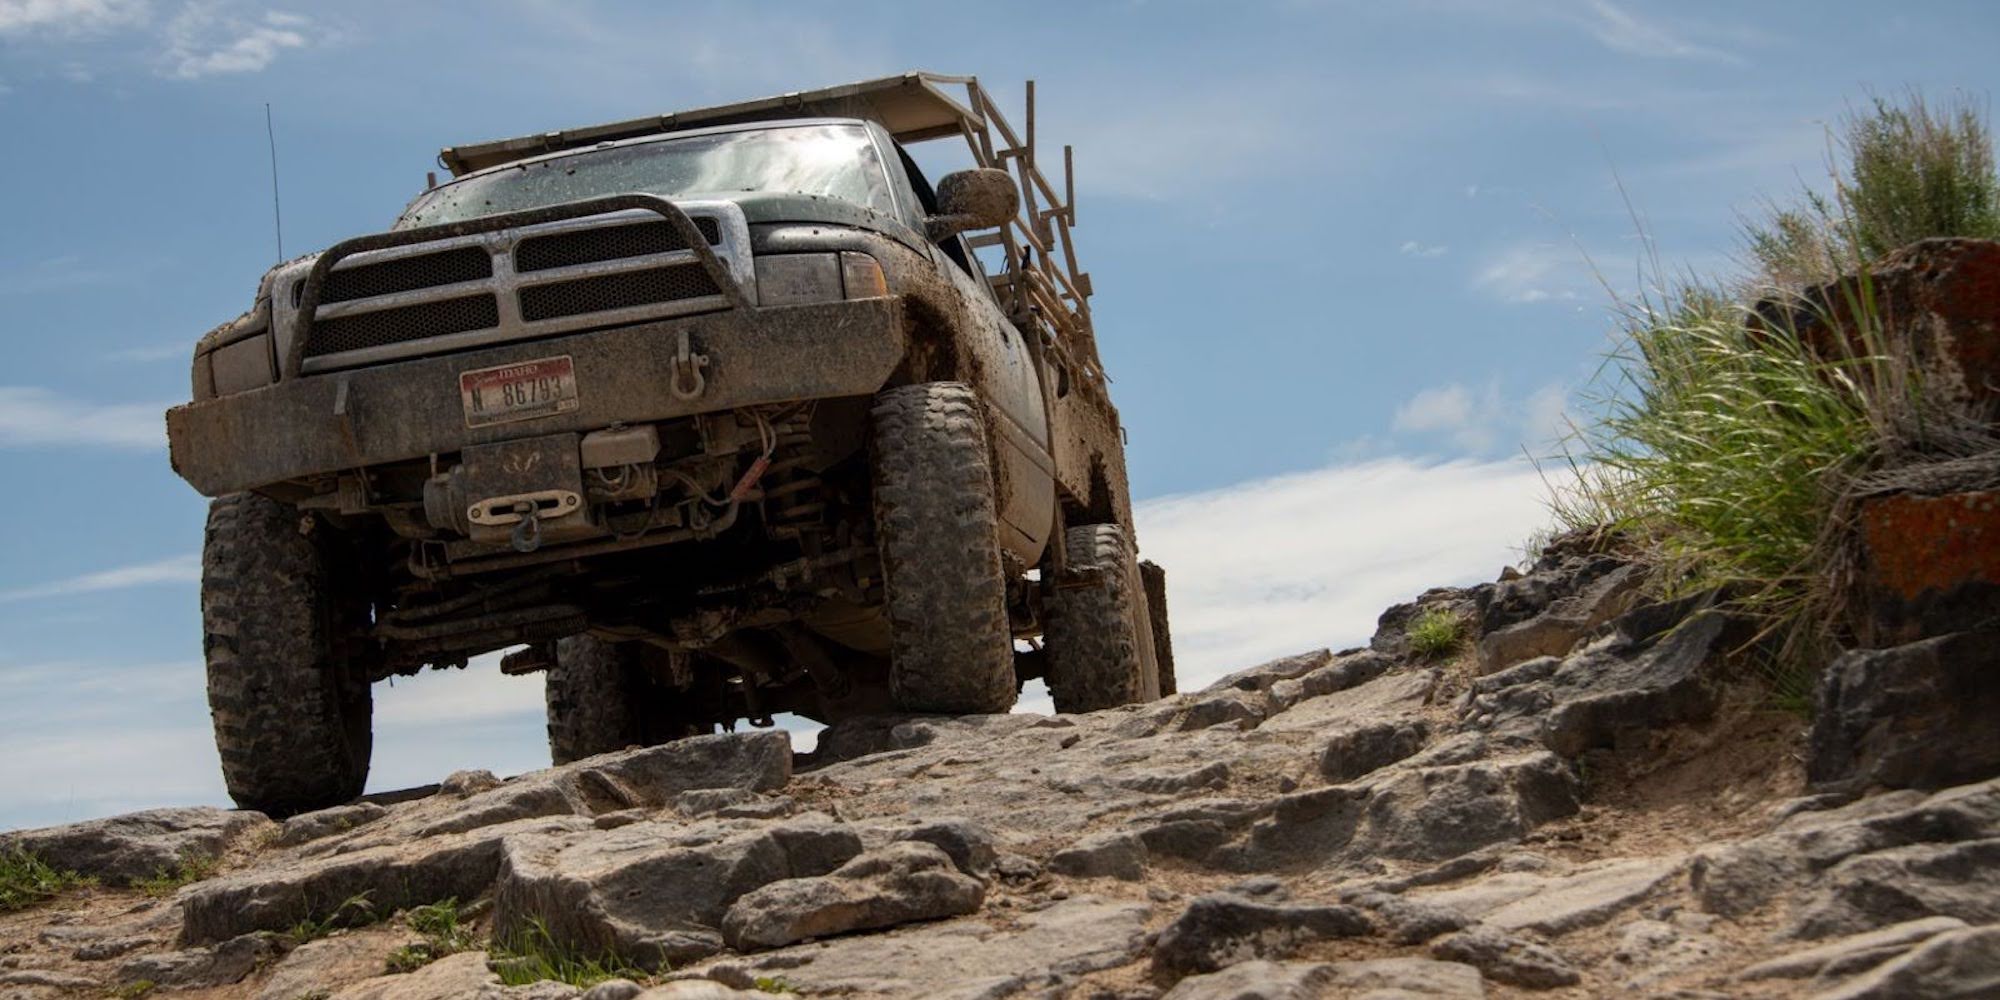 Off-roading truck going over large rocks on the way to the Bruneau River launch site